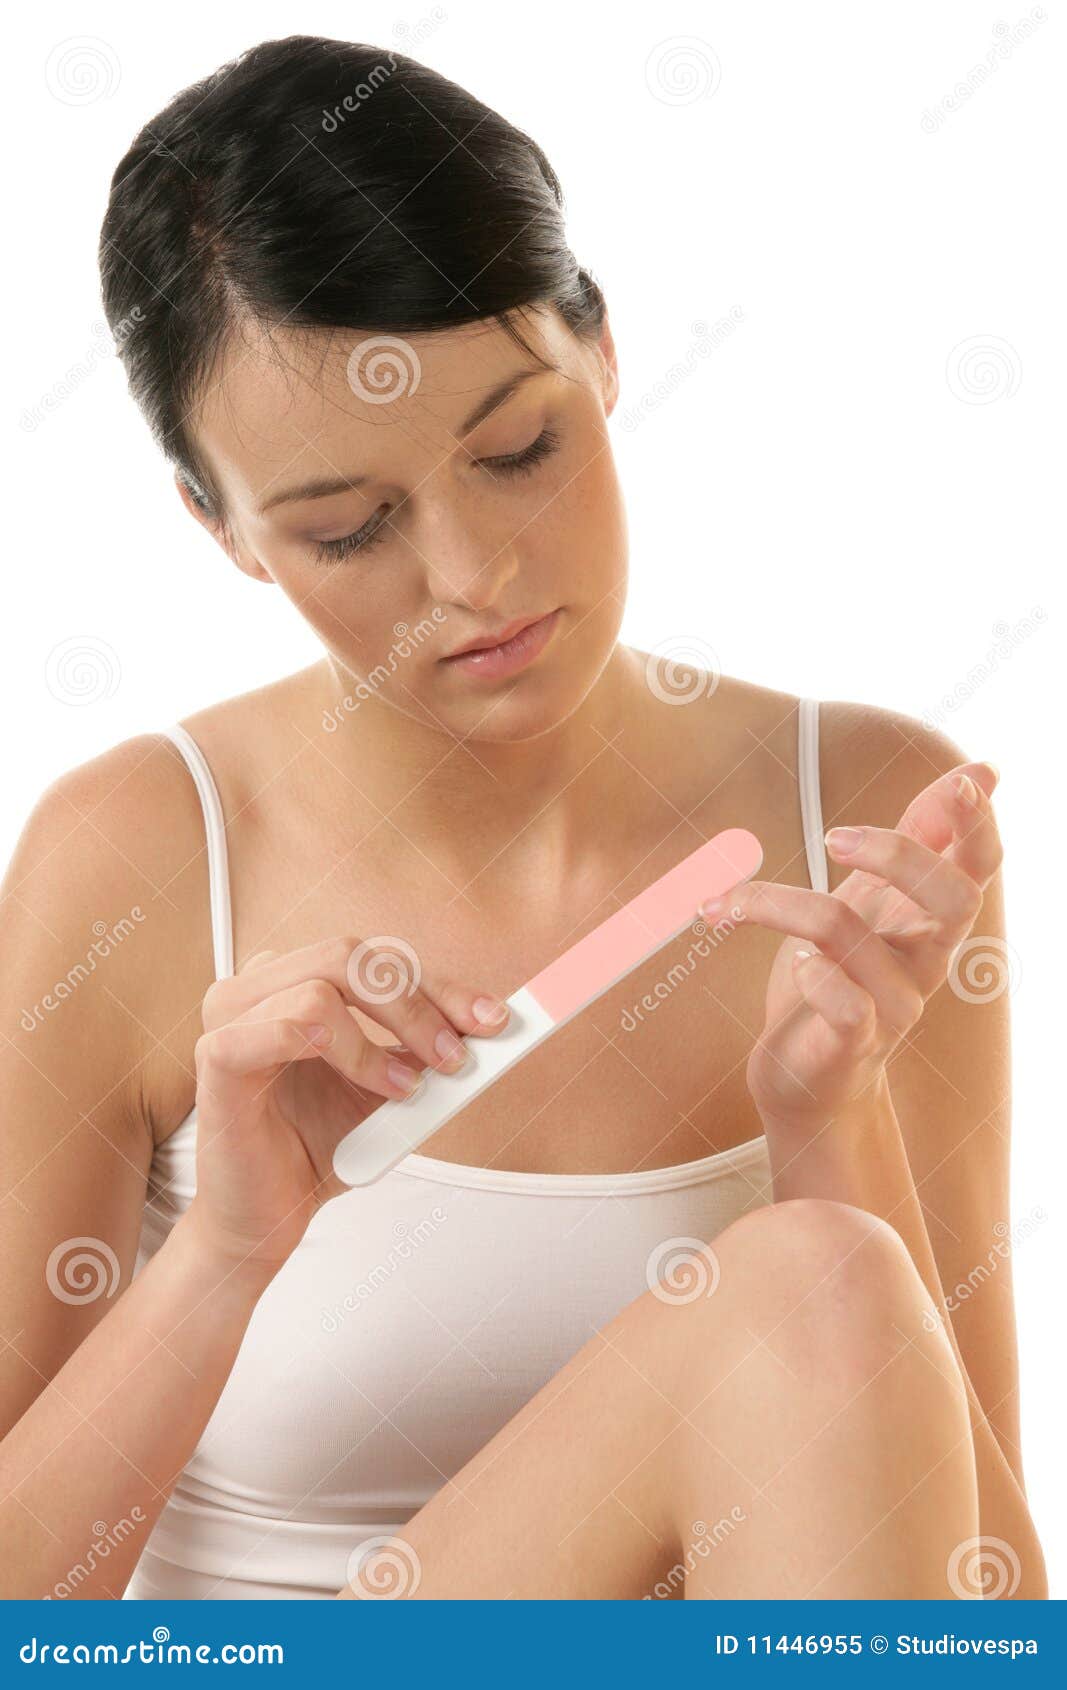 woman buffing her nails